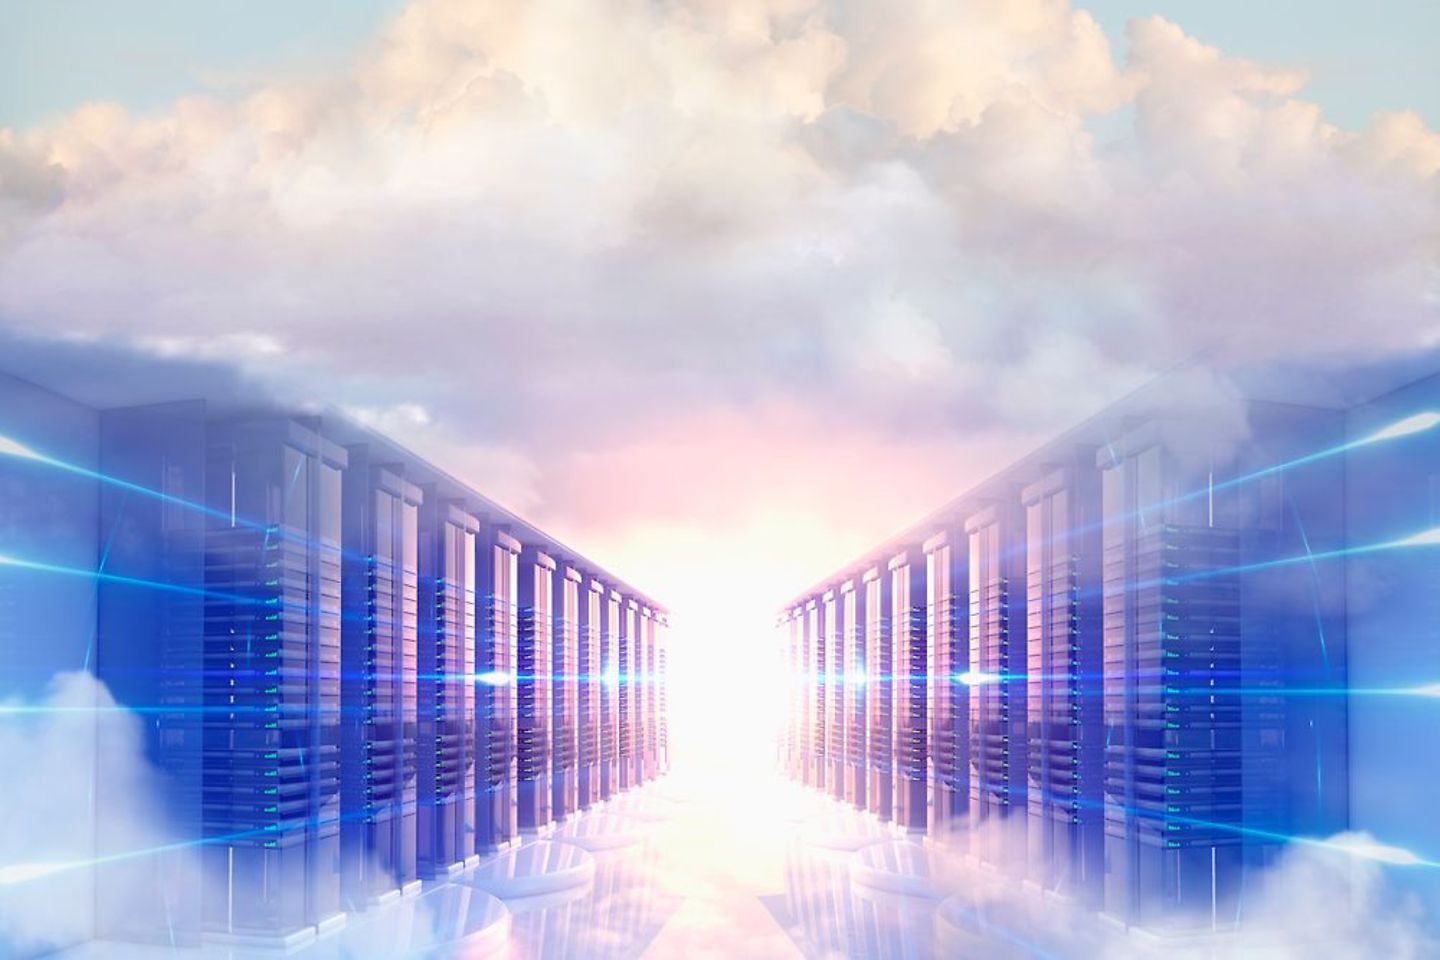 Server cabinets surrounded by pastel clouds and a light source in the center